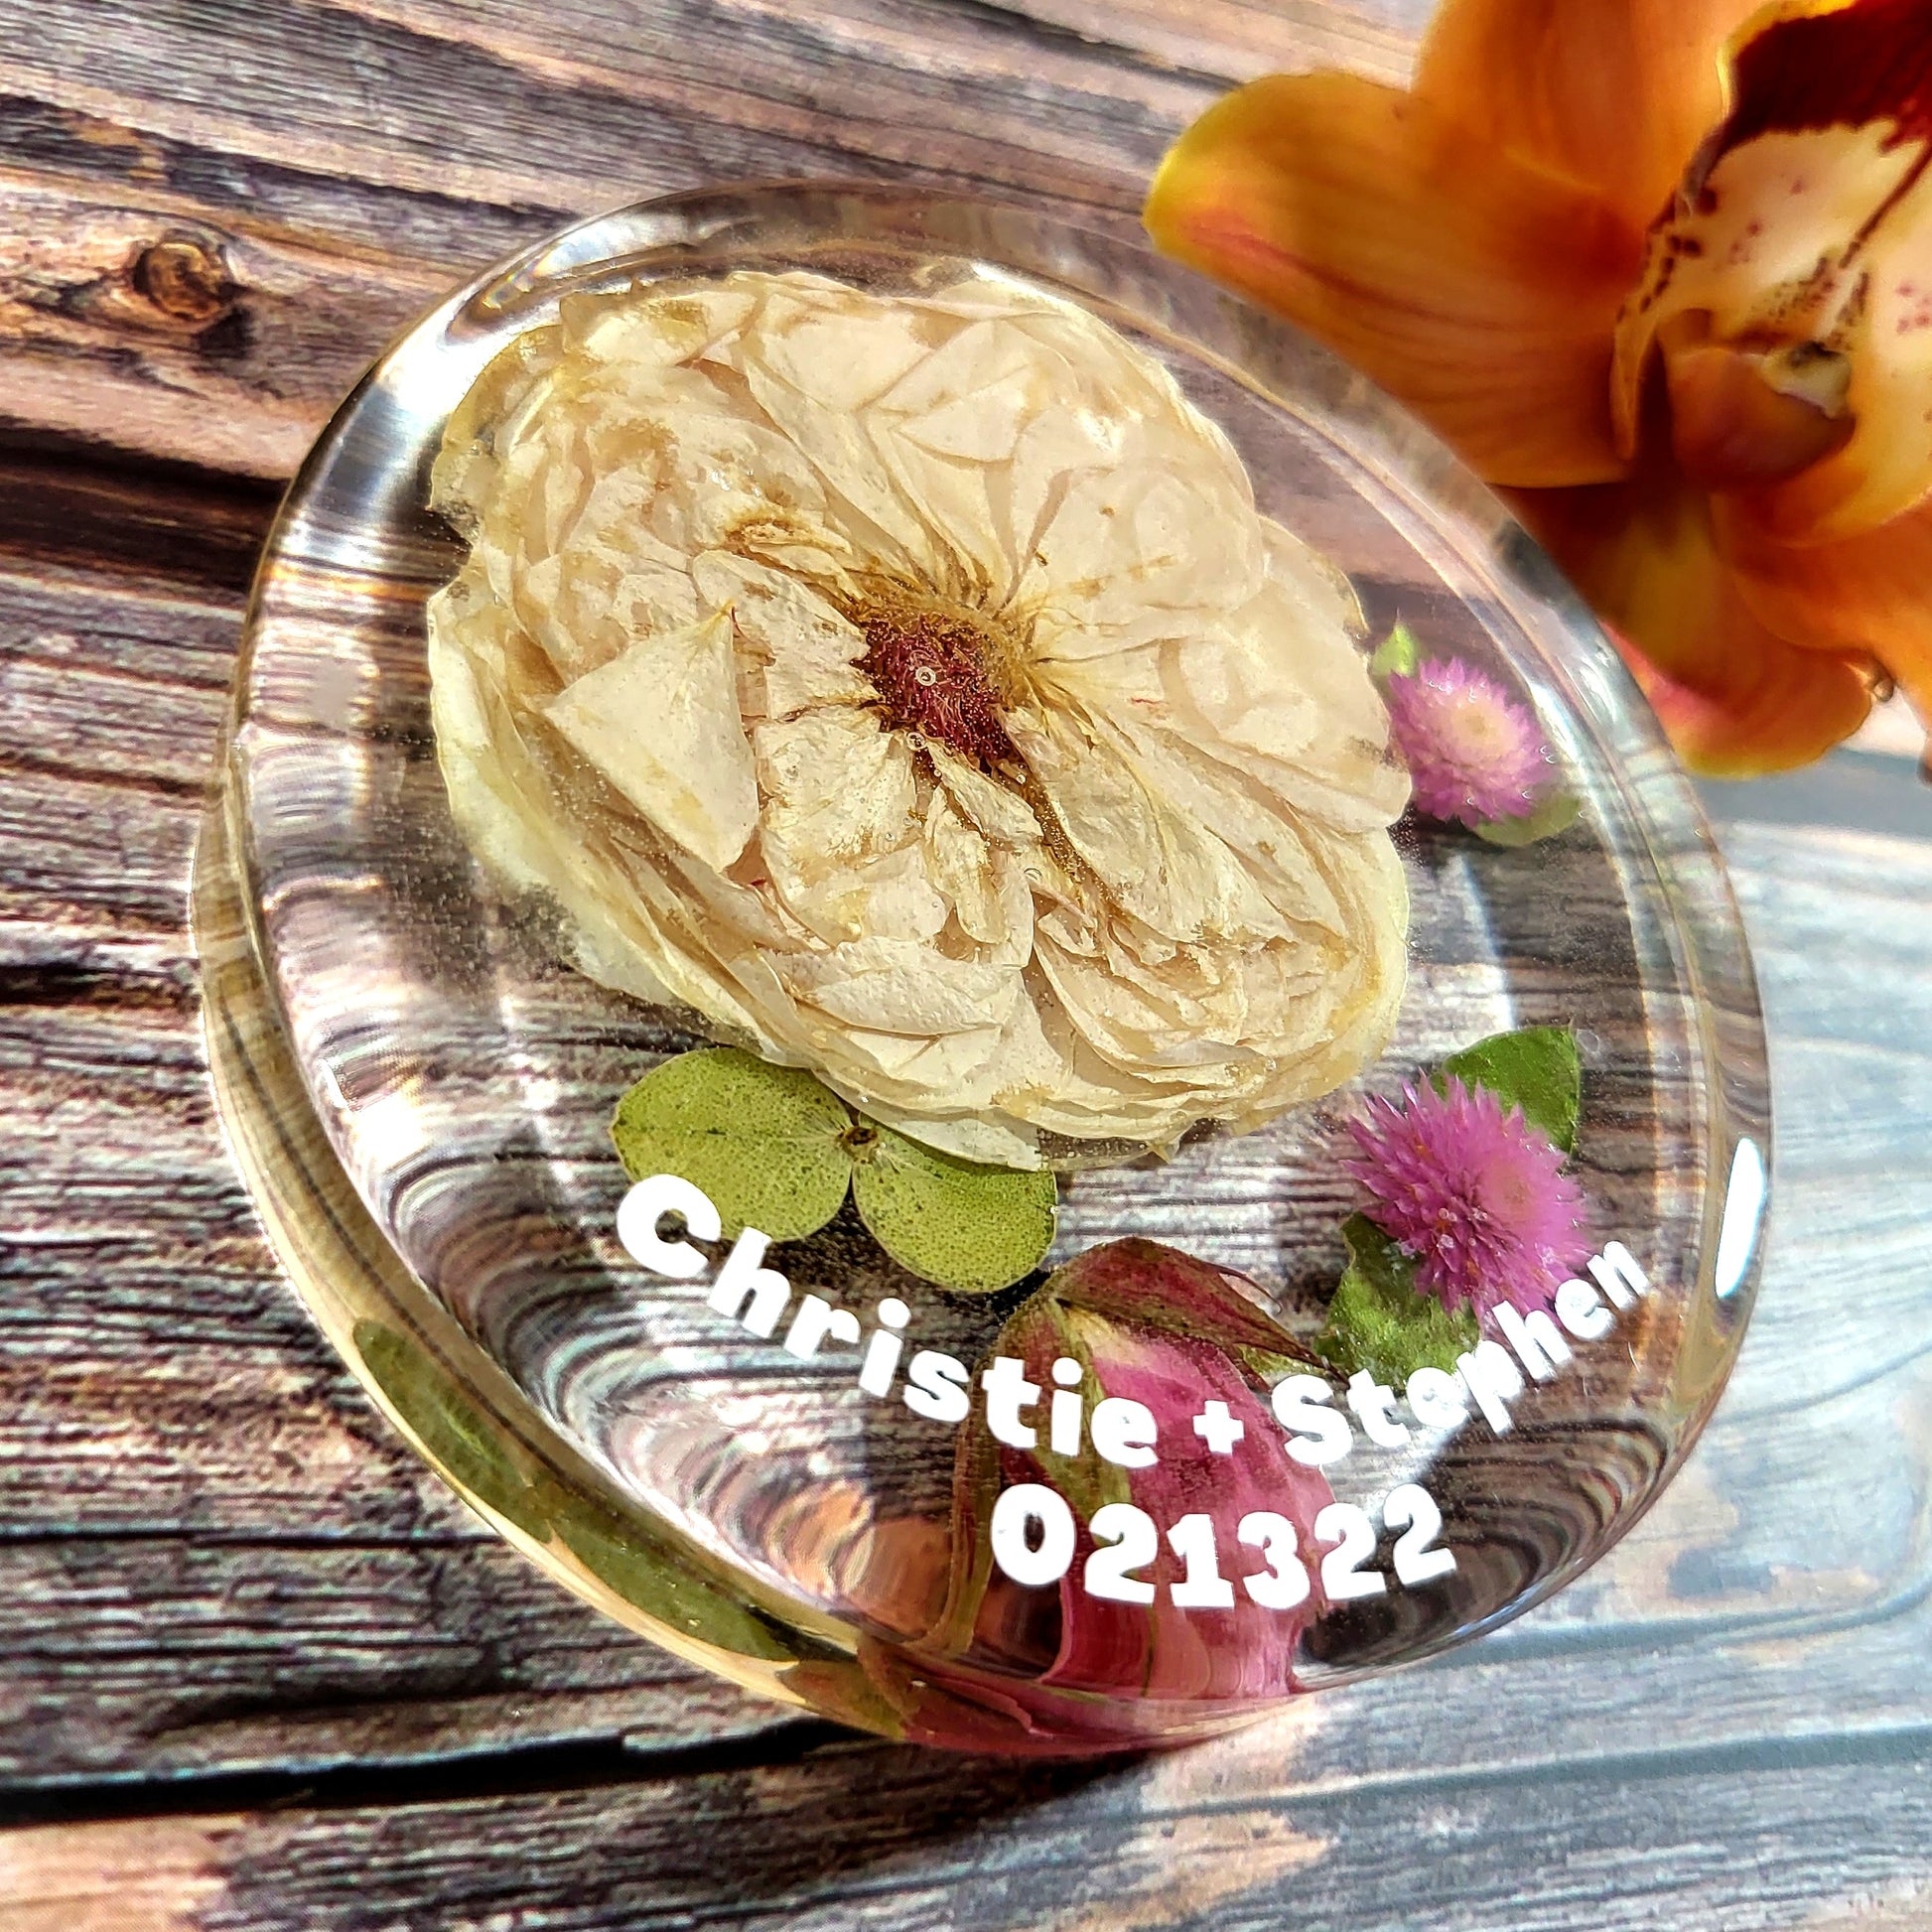 Resin Coaster Made Using Dried Flower Petals, Wedding Flowers, Memorial  Service Flowers. Funeral Flowers, Special Occasion Flowers. 